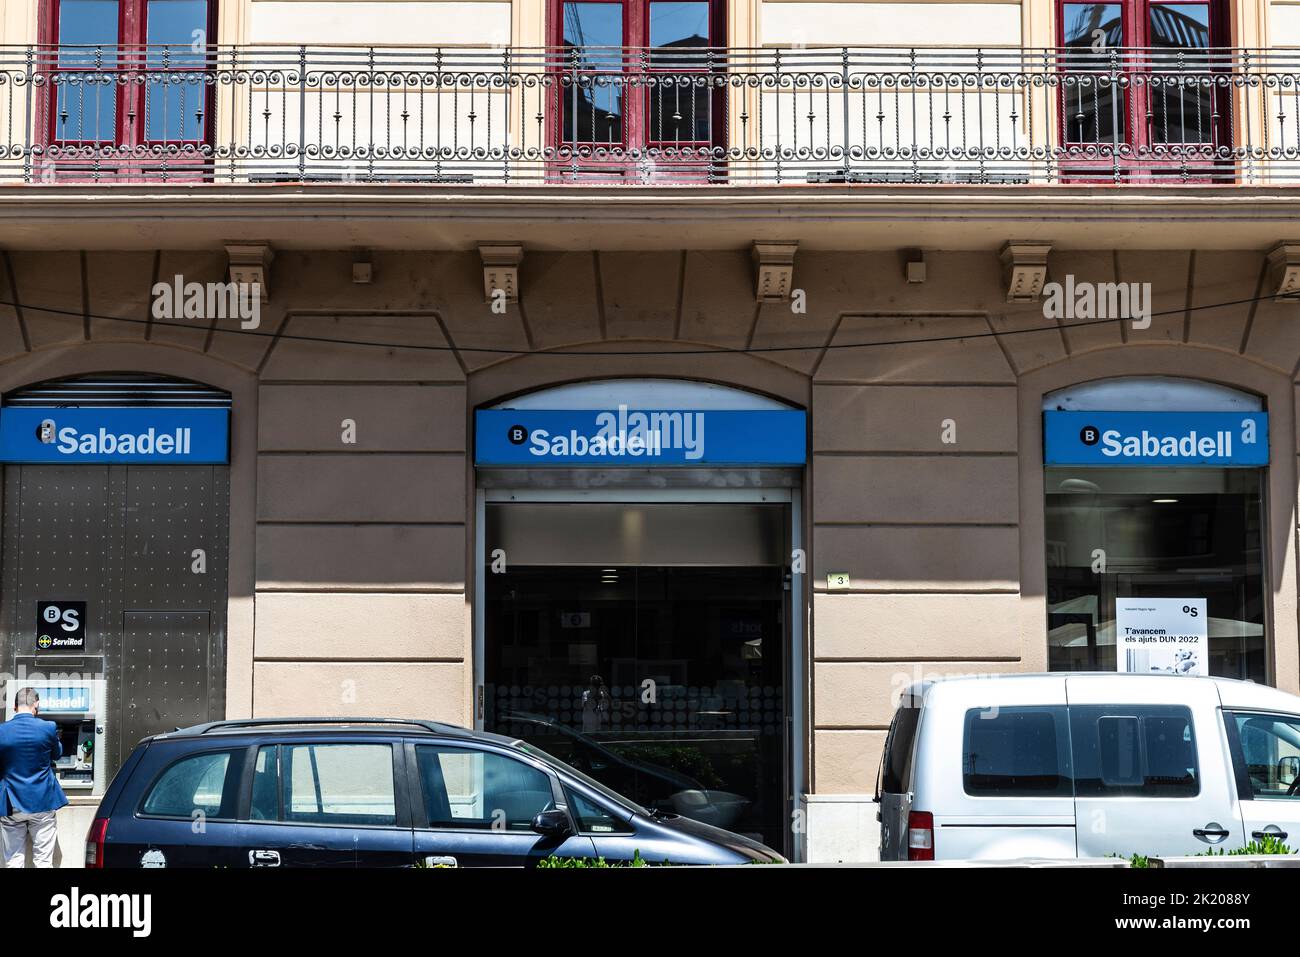 Tortosa, Spain - May 13, 2022: Facade and logo of the Banco Sabadell with people at the ATM in Tortosa, Catalonia, Spain Stock Photo